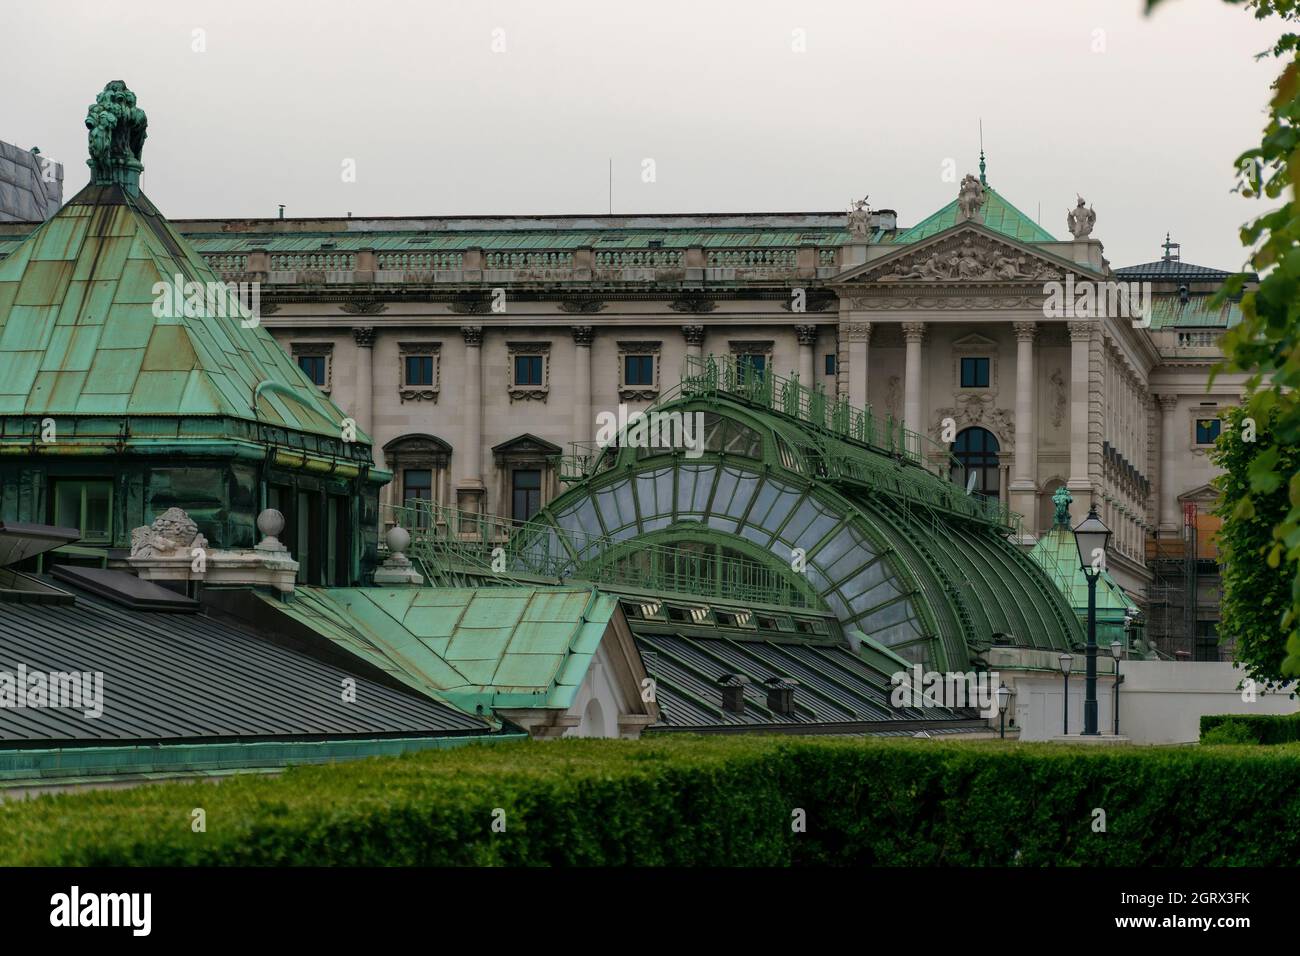 30 May 2019 Vienna, Austria - Schmetterlinghaus and Palmenhaus of Hofburg palace (Butterfly house and Palm house). Cloudy sky Stock Photo